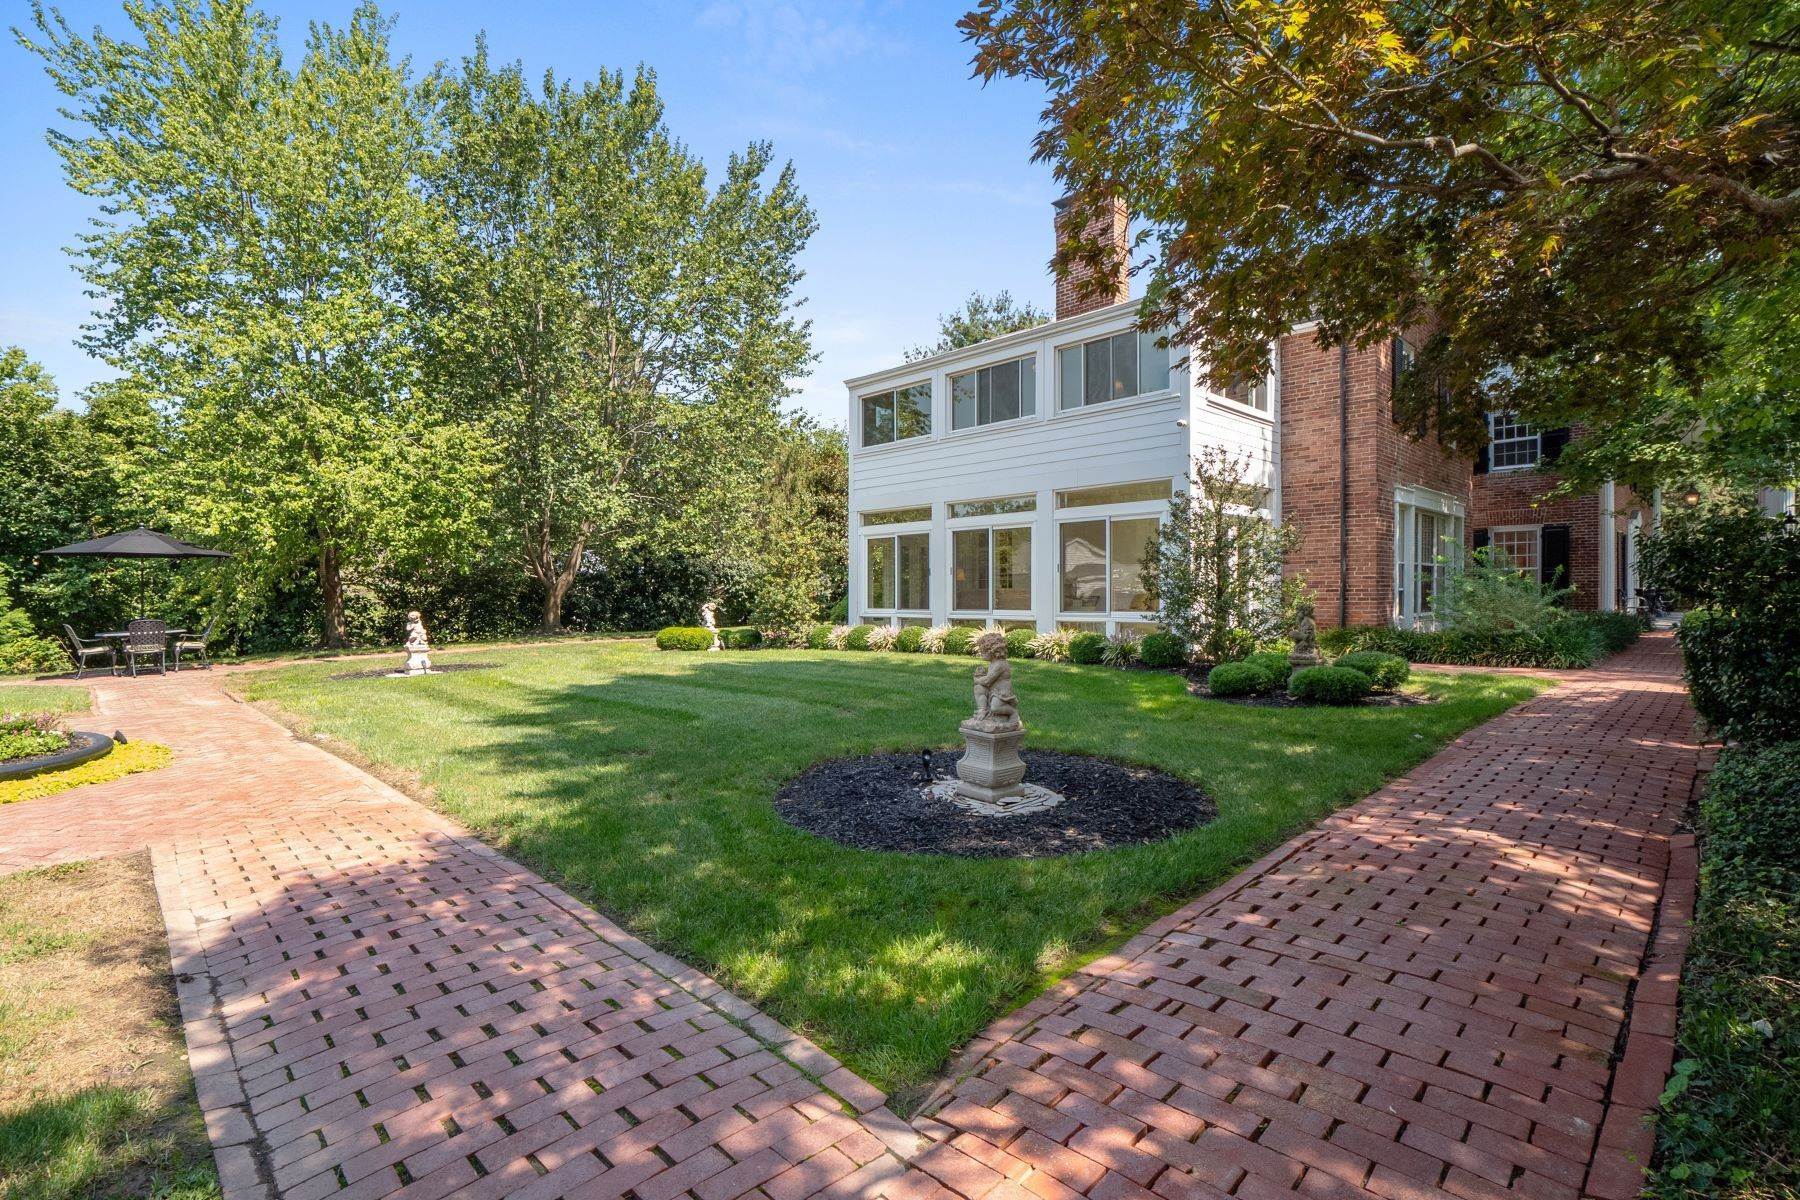 47. Single Family Homes for Sale at Stately Ladue home blends old and new 9633 Ladue Road Ladue, Missouri 63124 United States